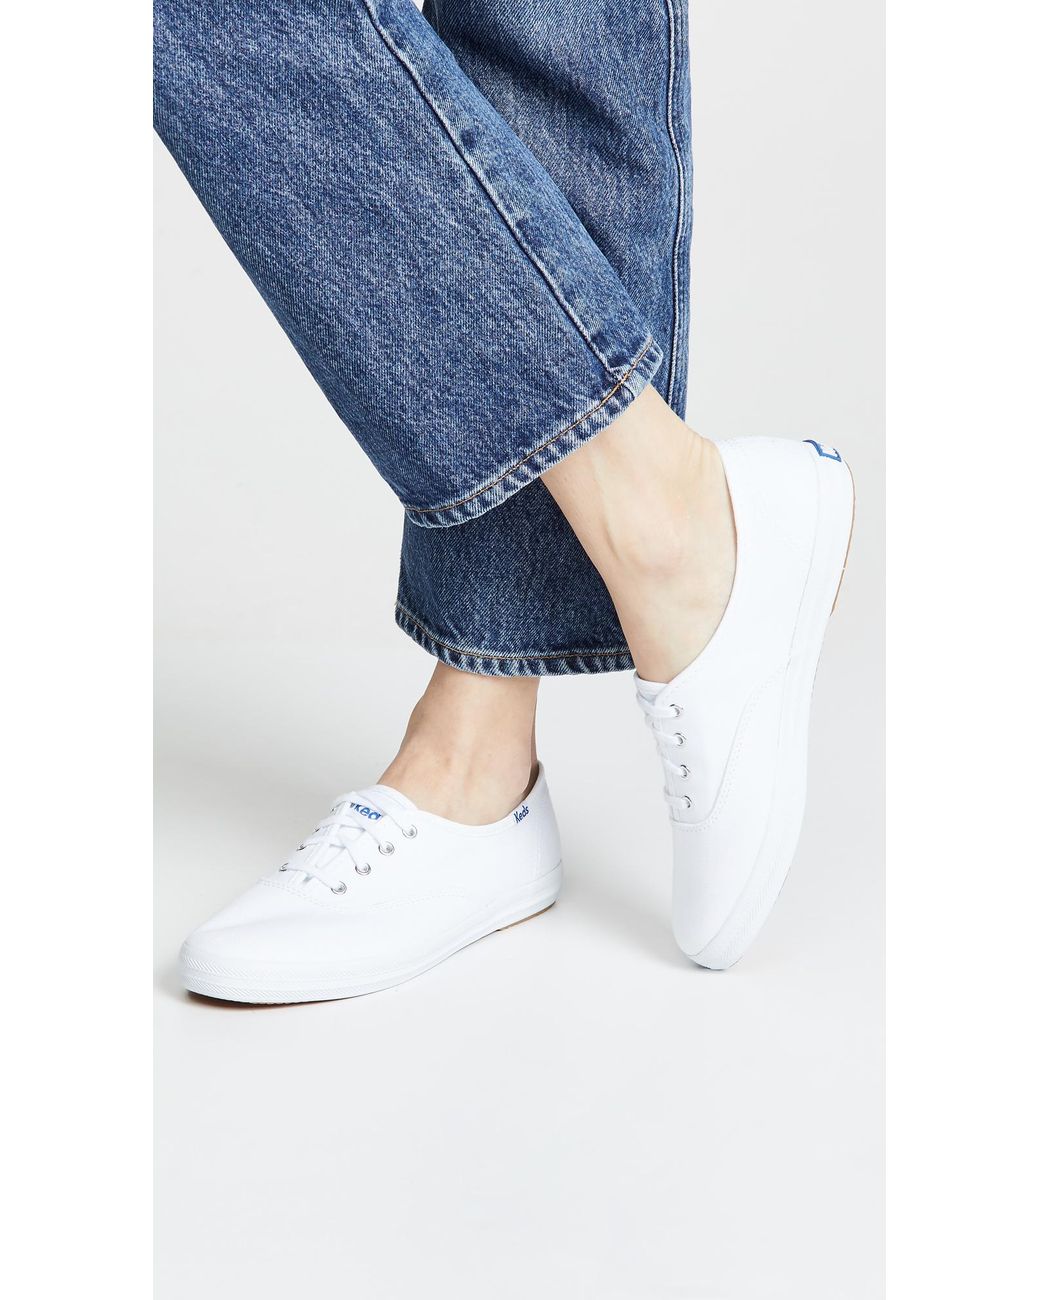 Keds Canvas Champion Sneakers in White | Lyst